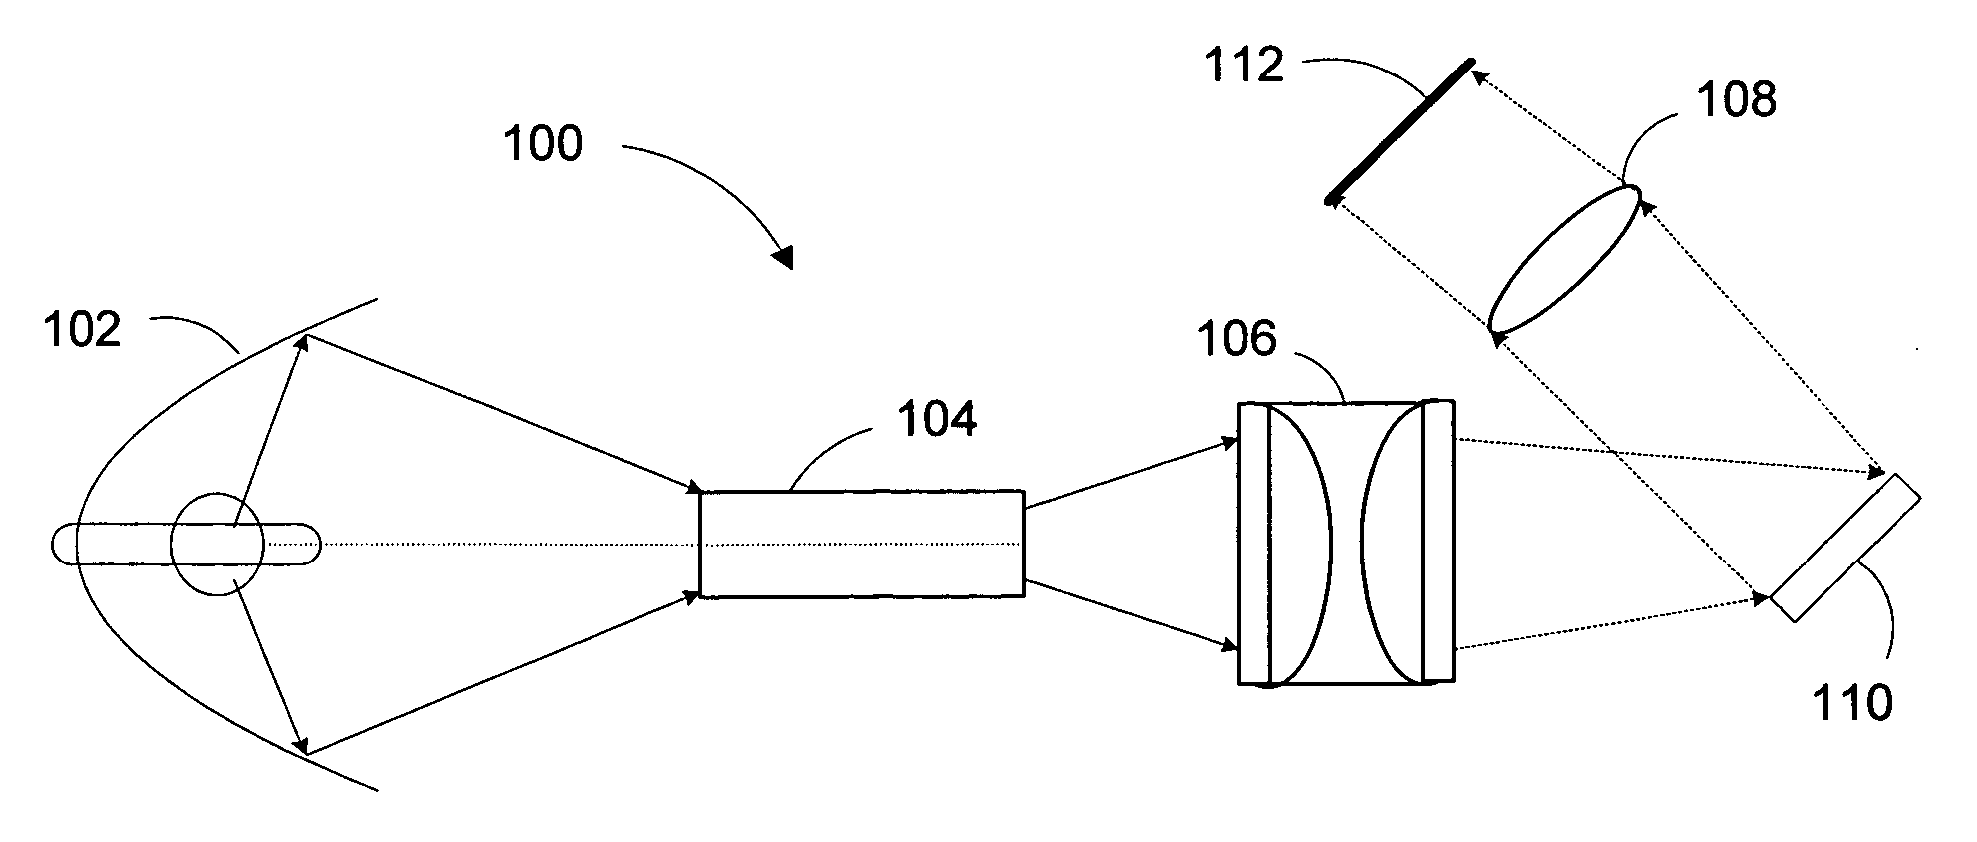 Micromirror array assembly with in-array pillars